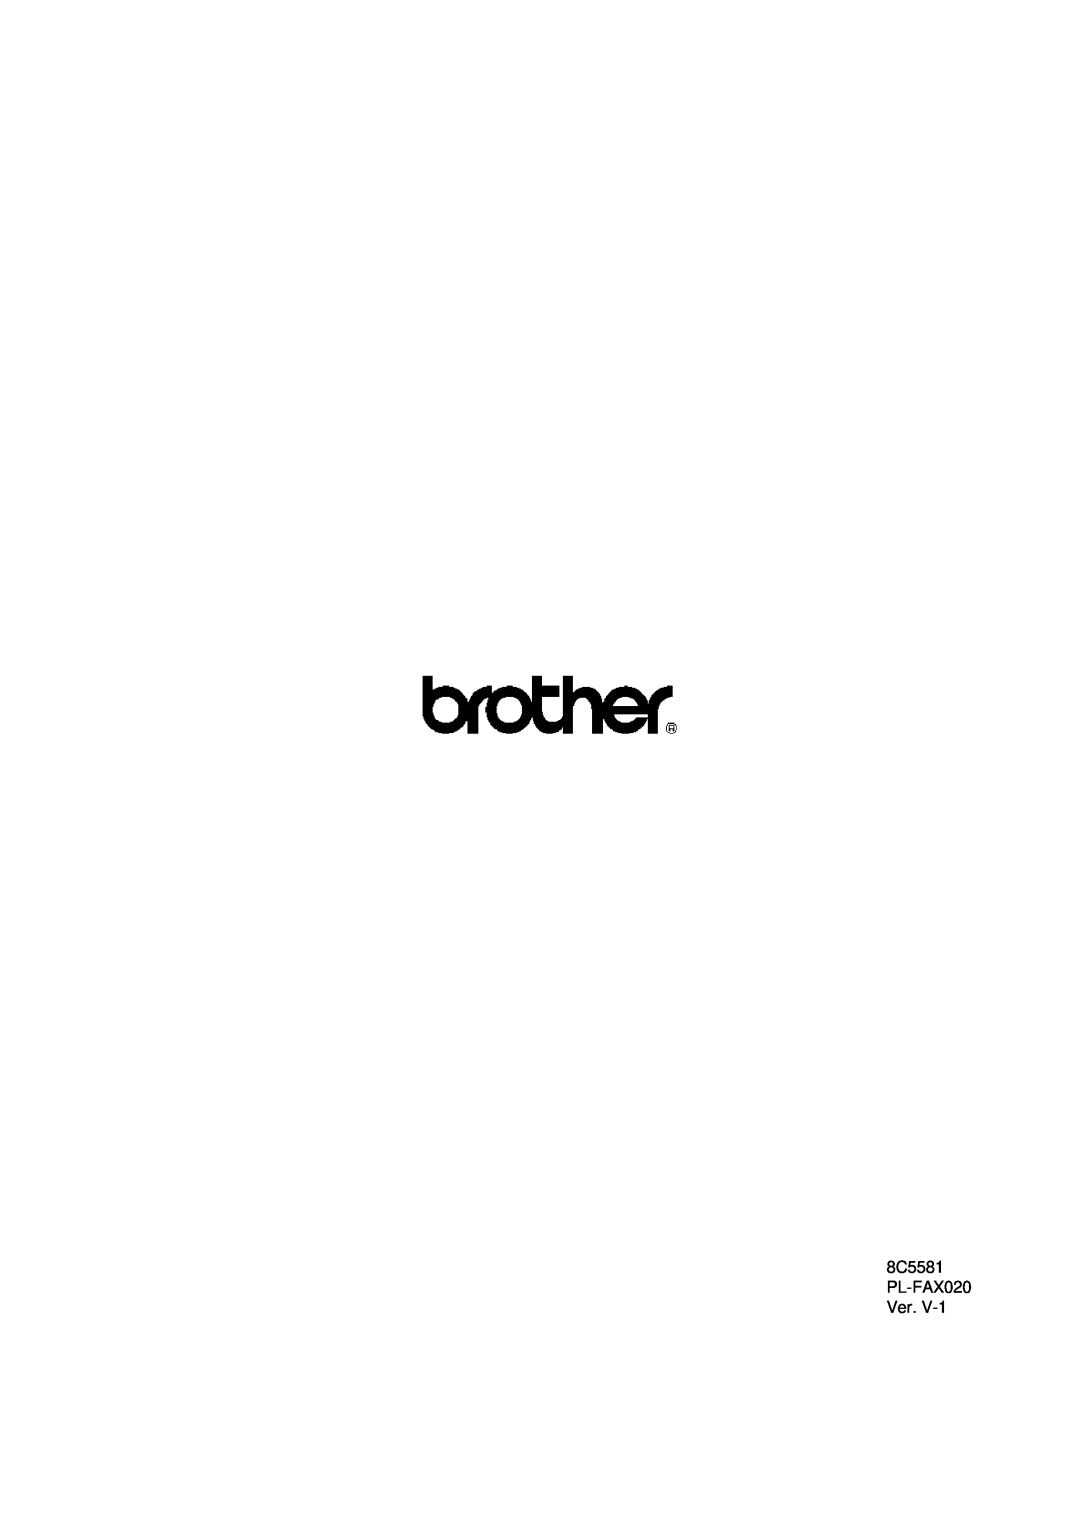 Brother MFC9860, 9880 manual 8C5581 PL-FAX020 Ver 